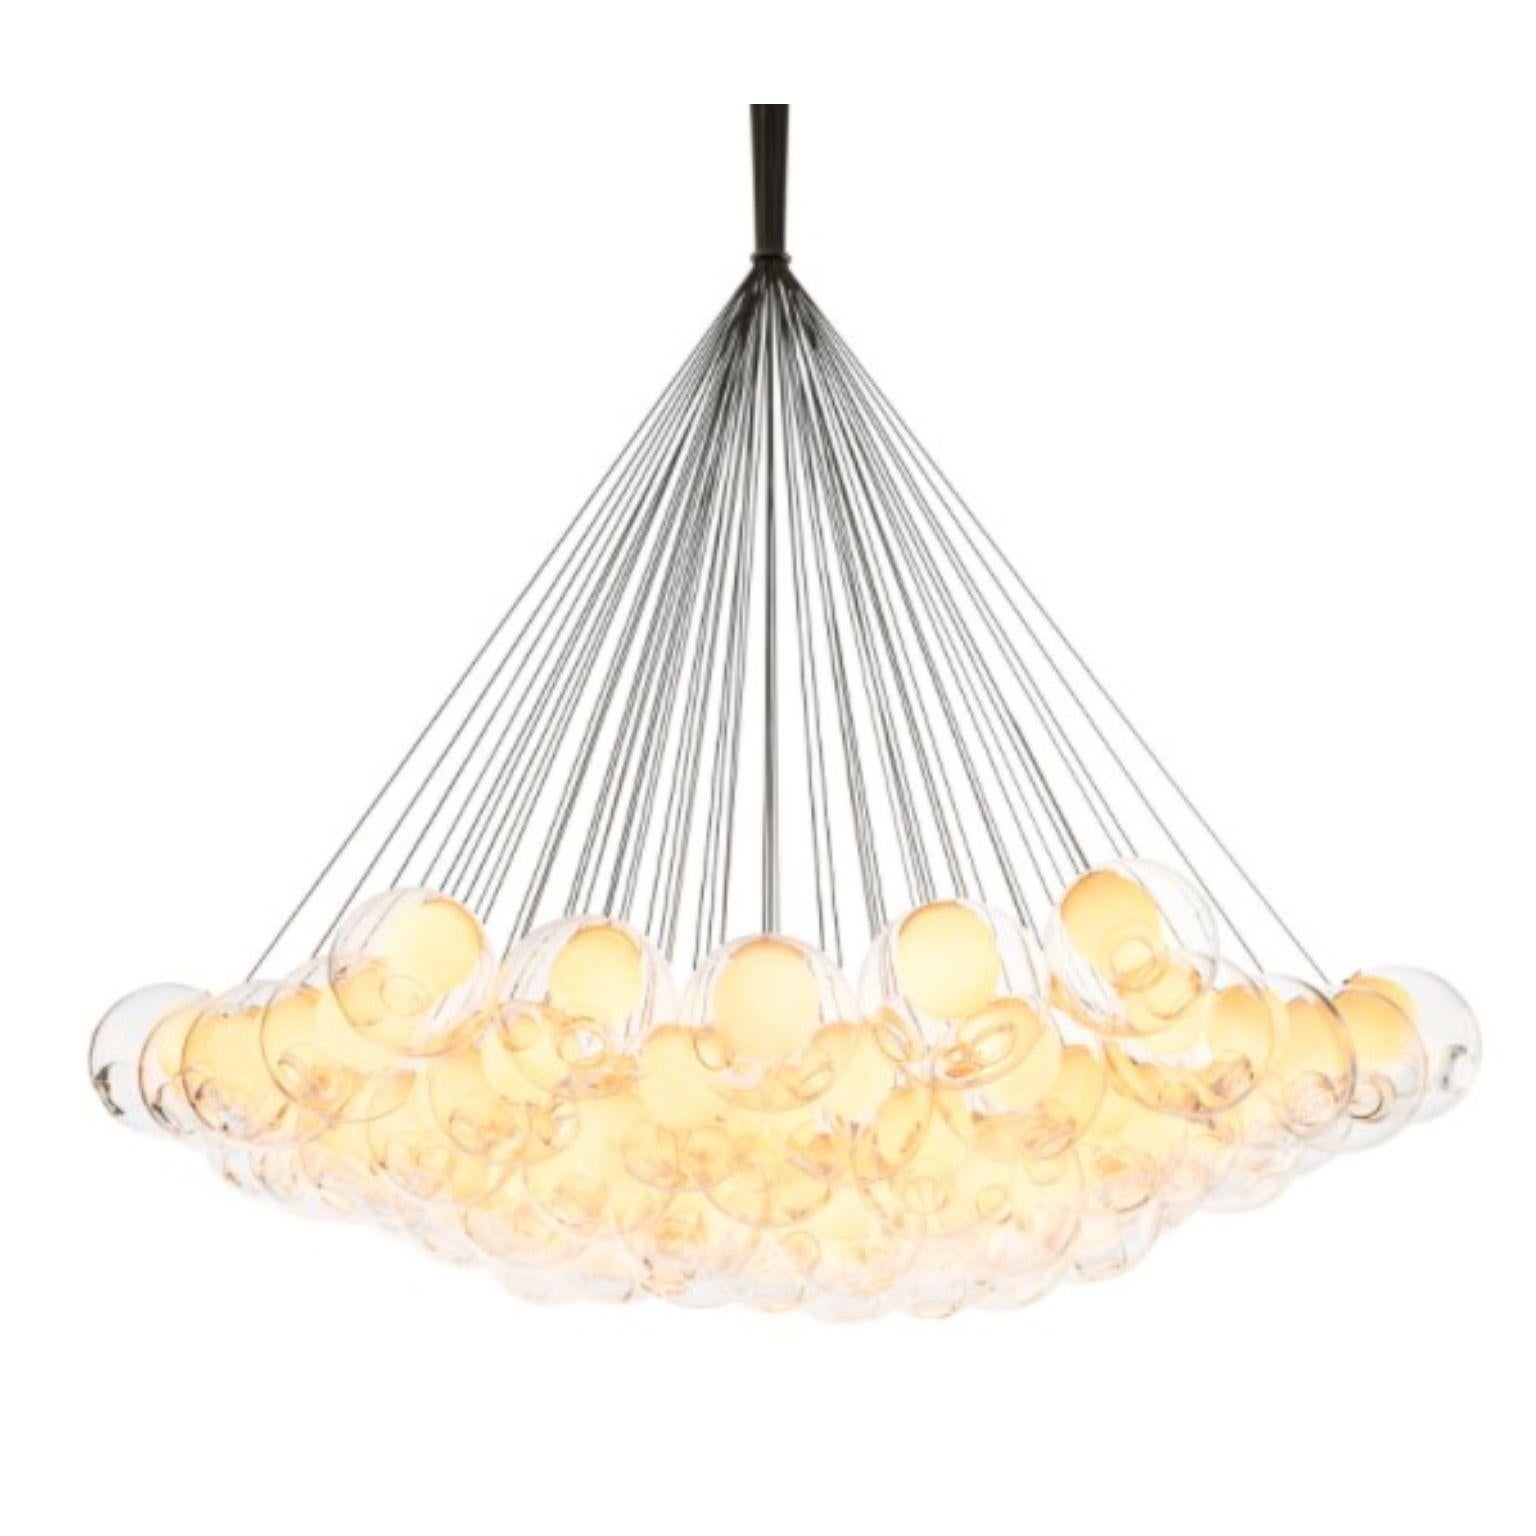 28.61 pendant by Bocci
Dimensions: D70.1 x H300 cm
Materials: white powder coated round canopy
Weight: 98 kg
Also Available in different dimensions.

All our lamps can be wired according to each country. If sold to the USA it will be wired for